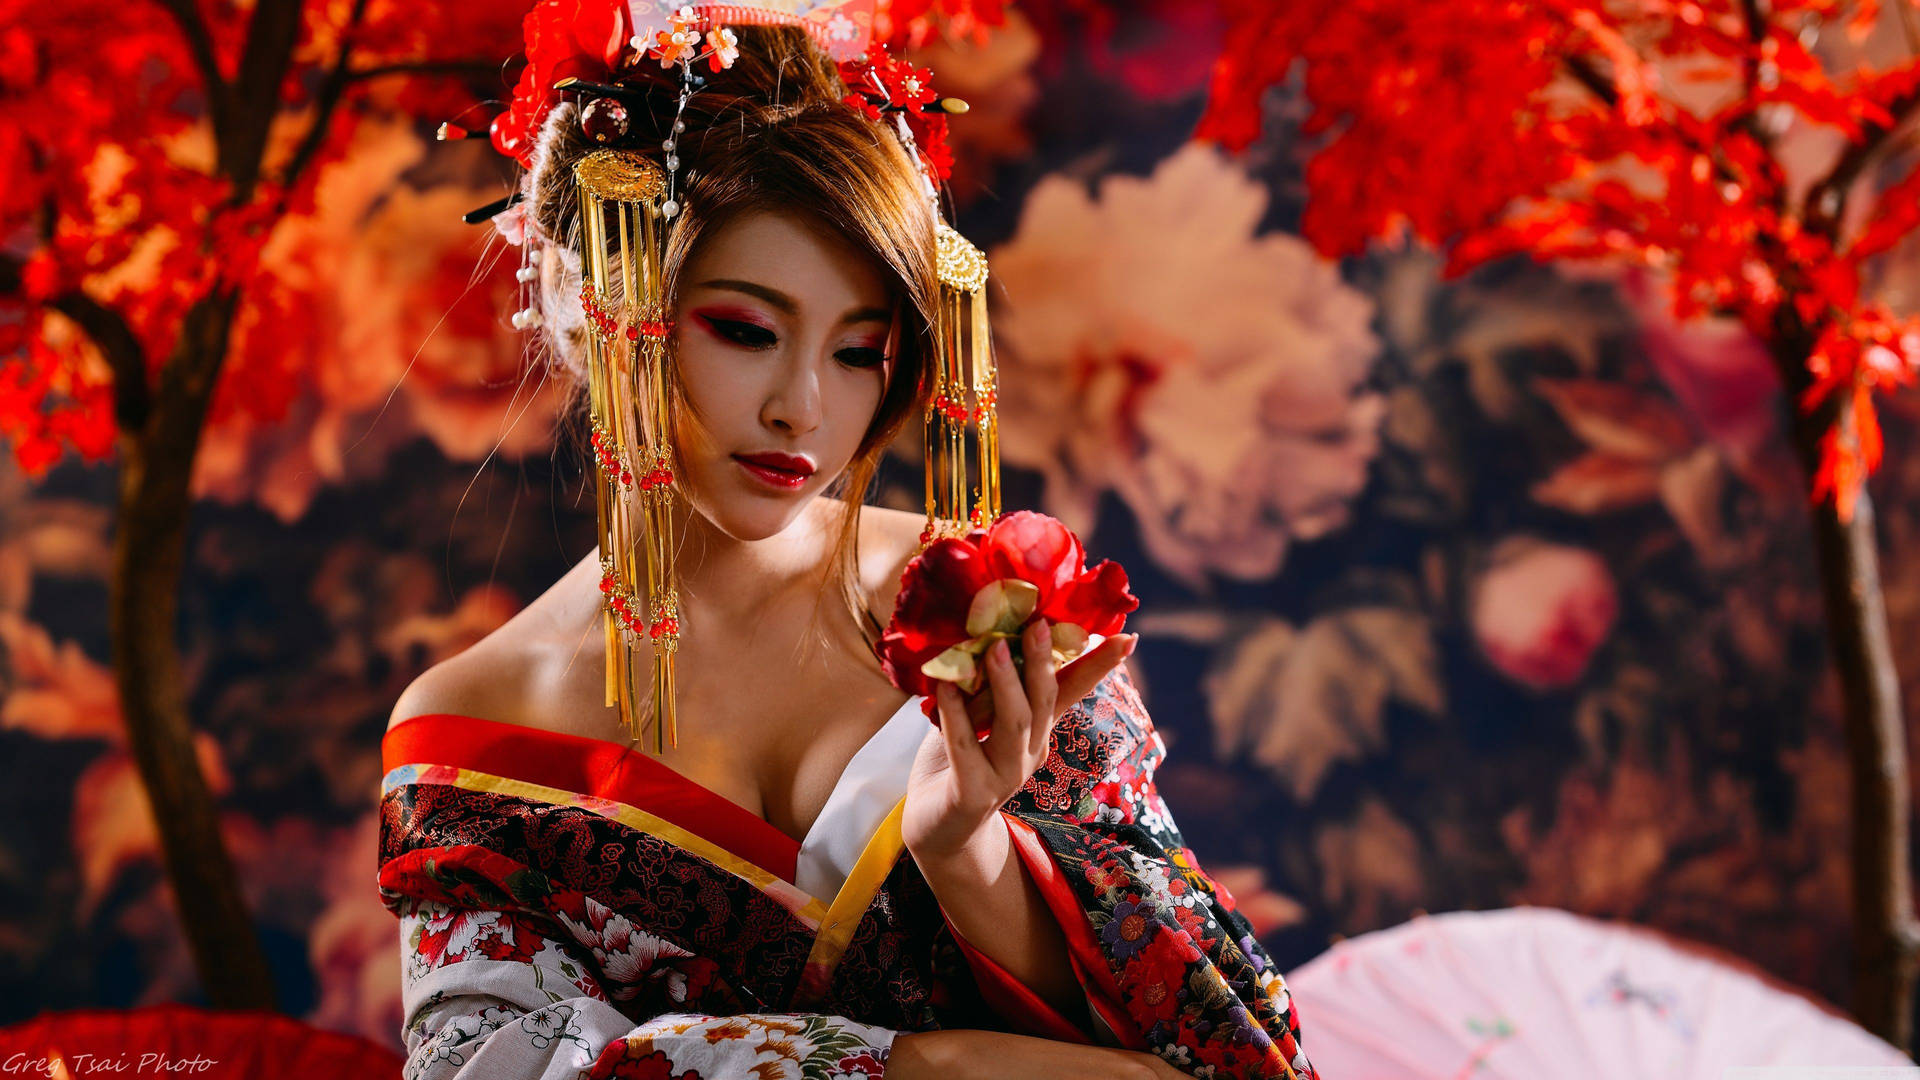 Japanese Girl With Red Flower Background